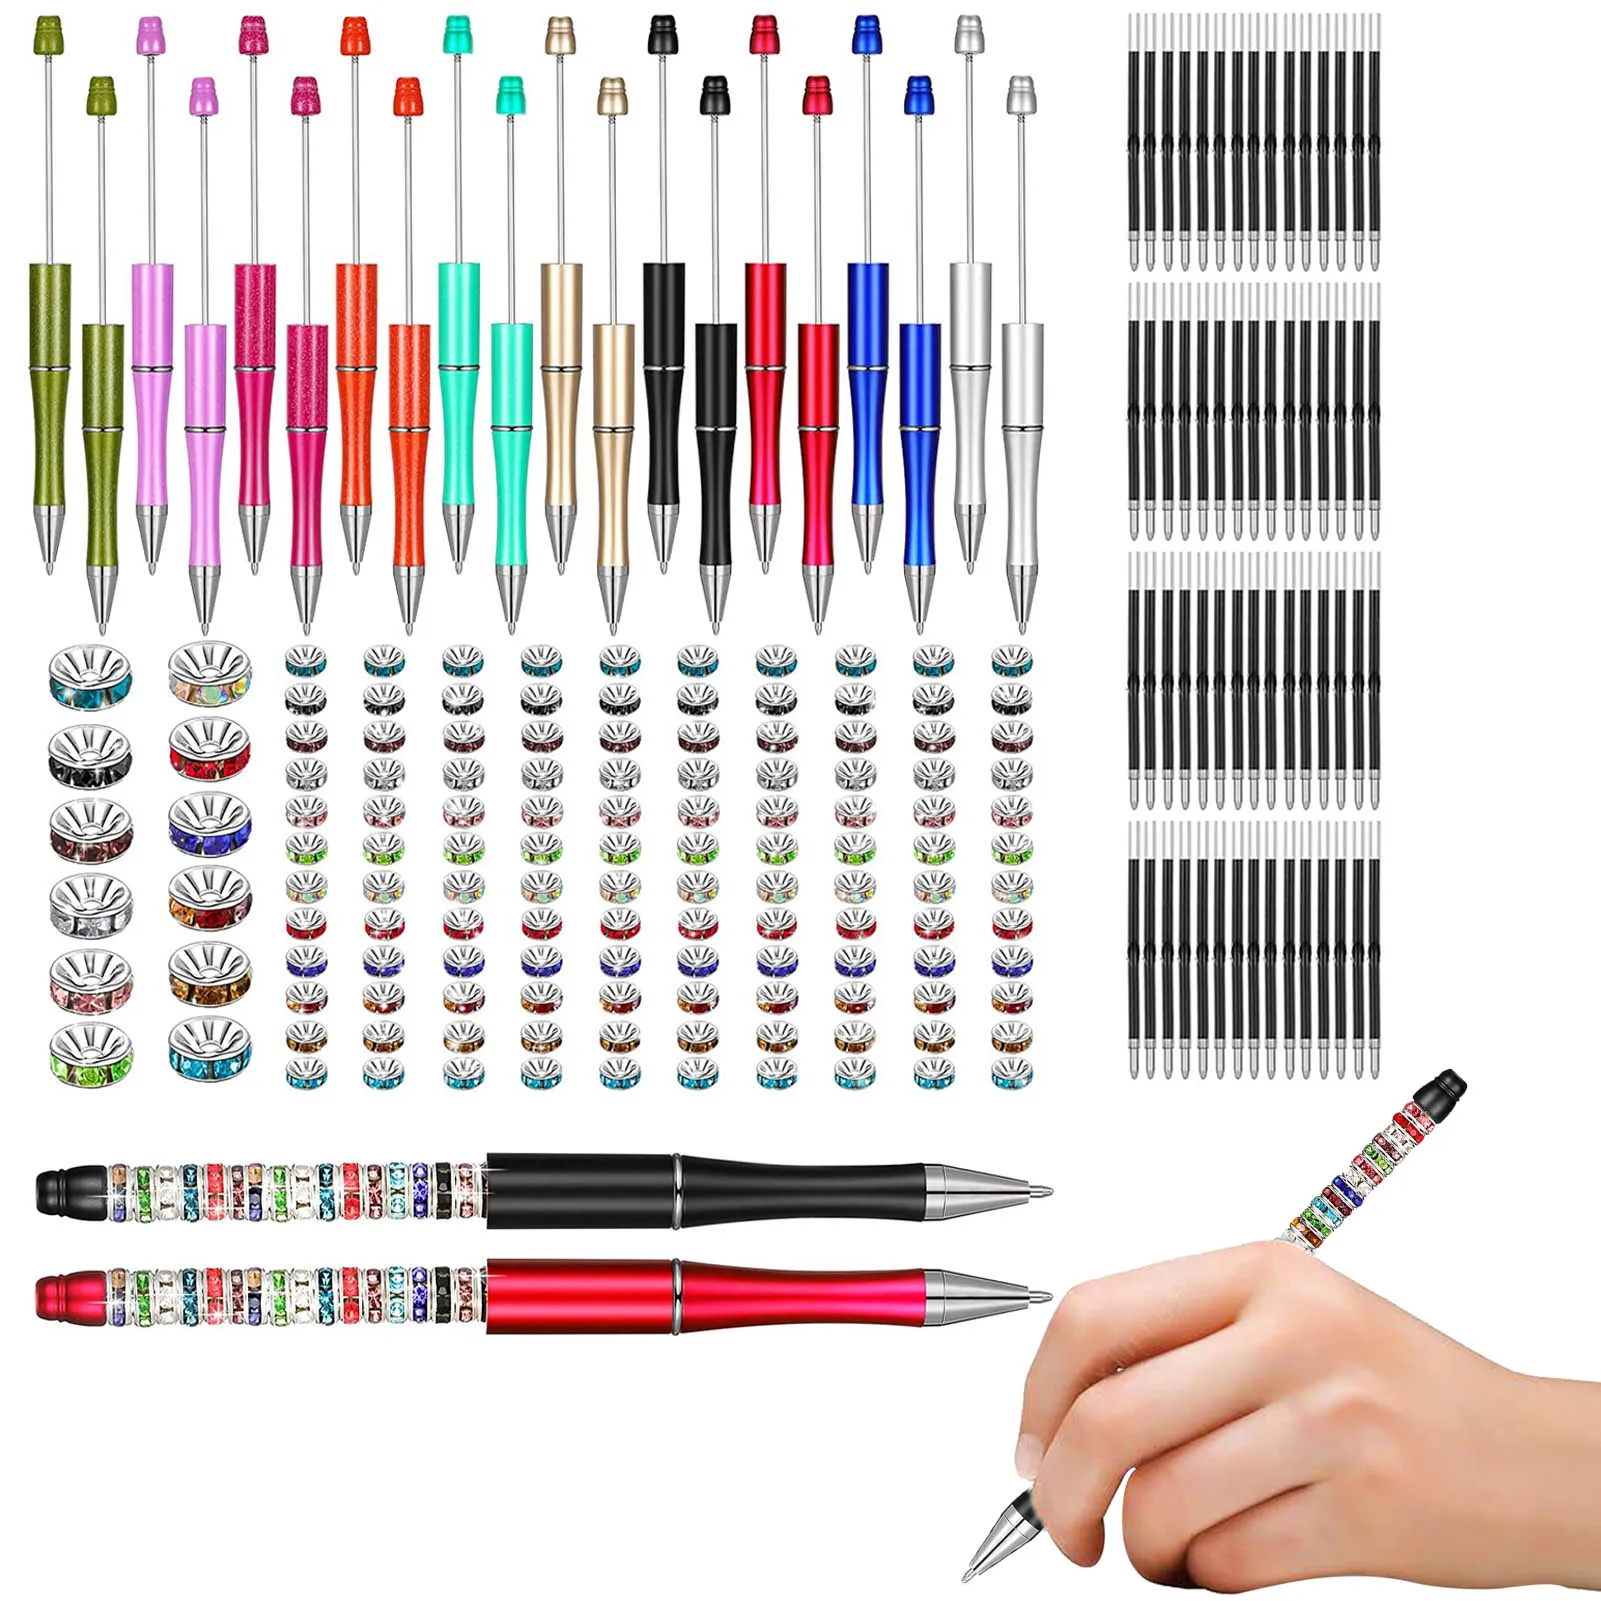 

Beadable Pen Light And Smooth Beadable Pen Assorted Bead Pen Set Include 20 Bead Pens 40 Black Refills And 240 Bright Spacer